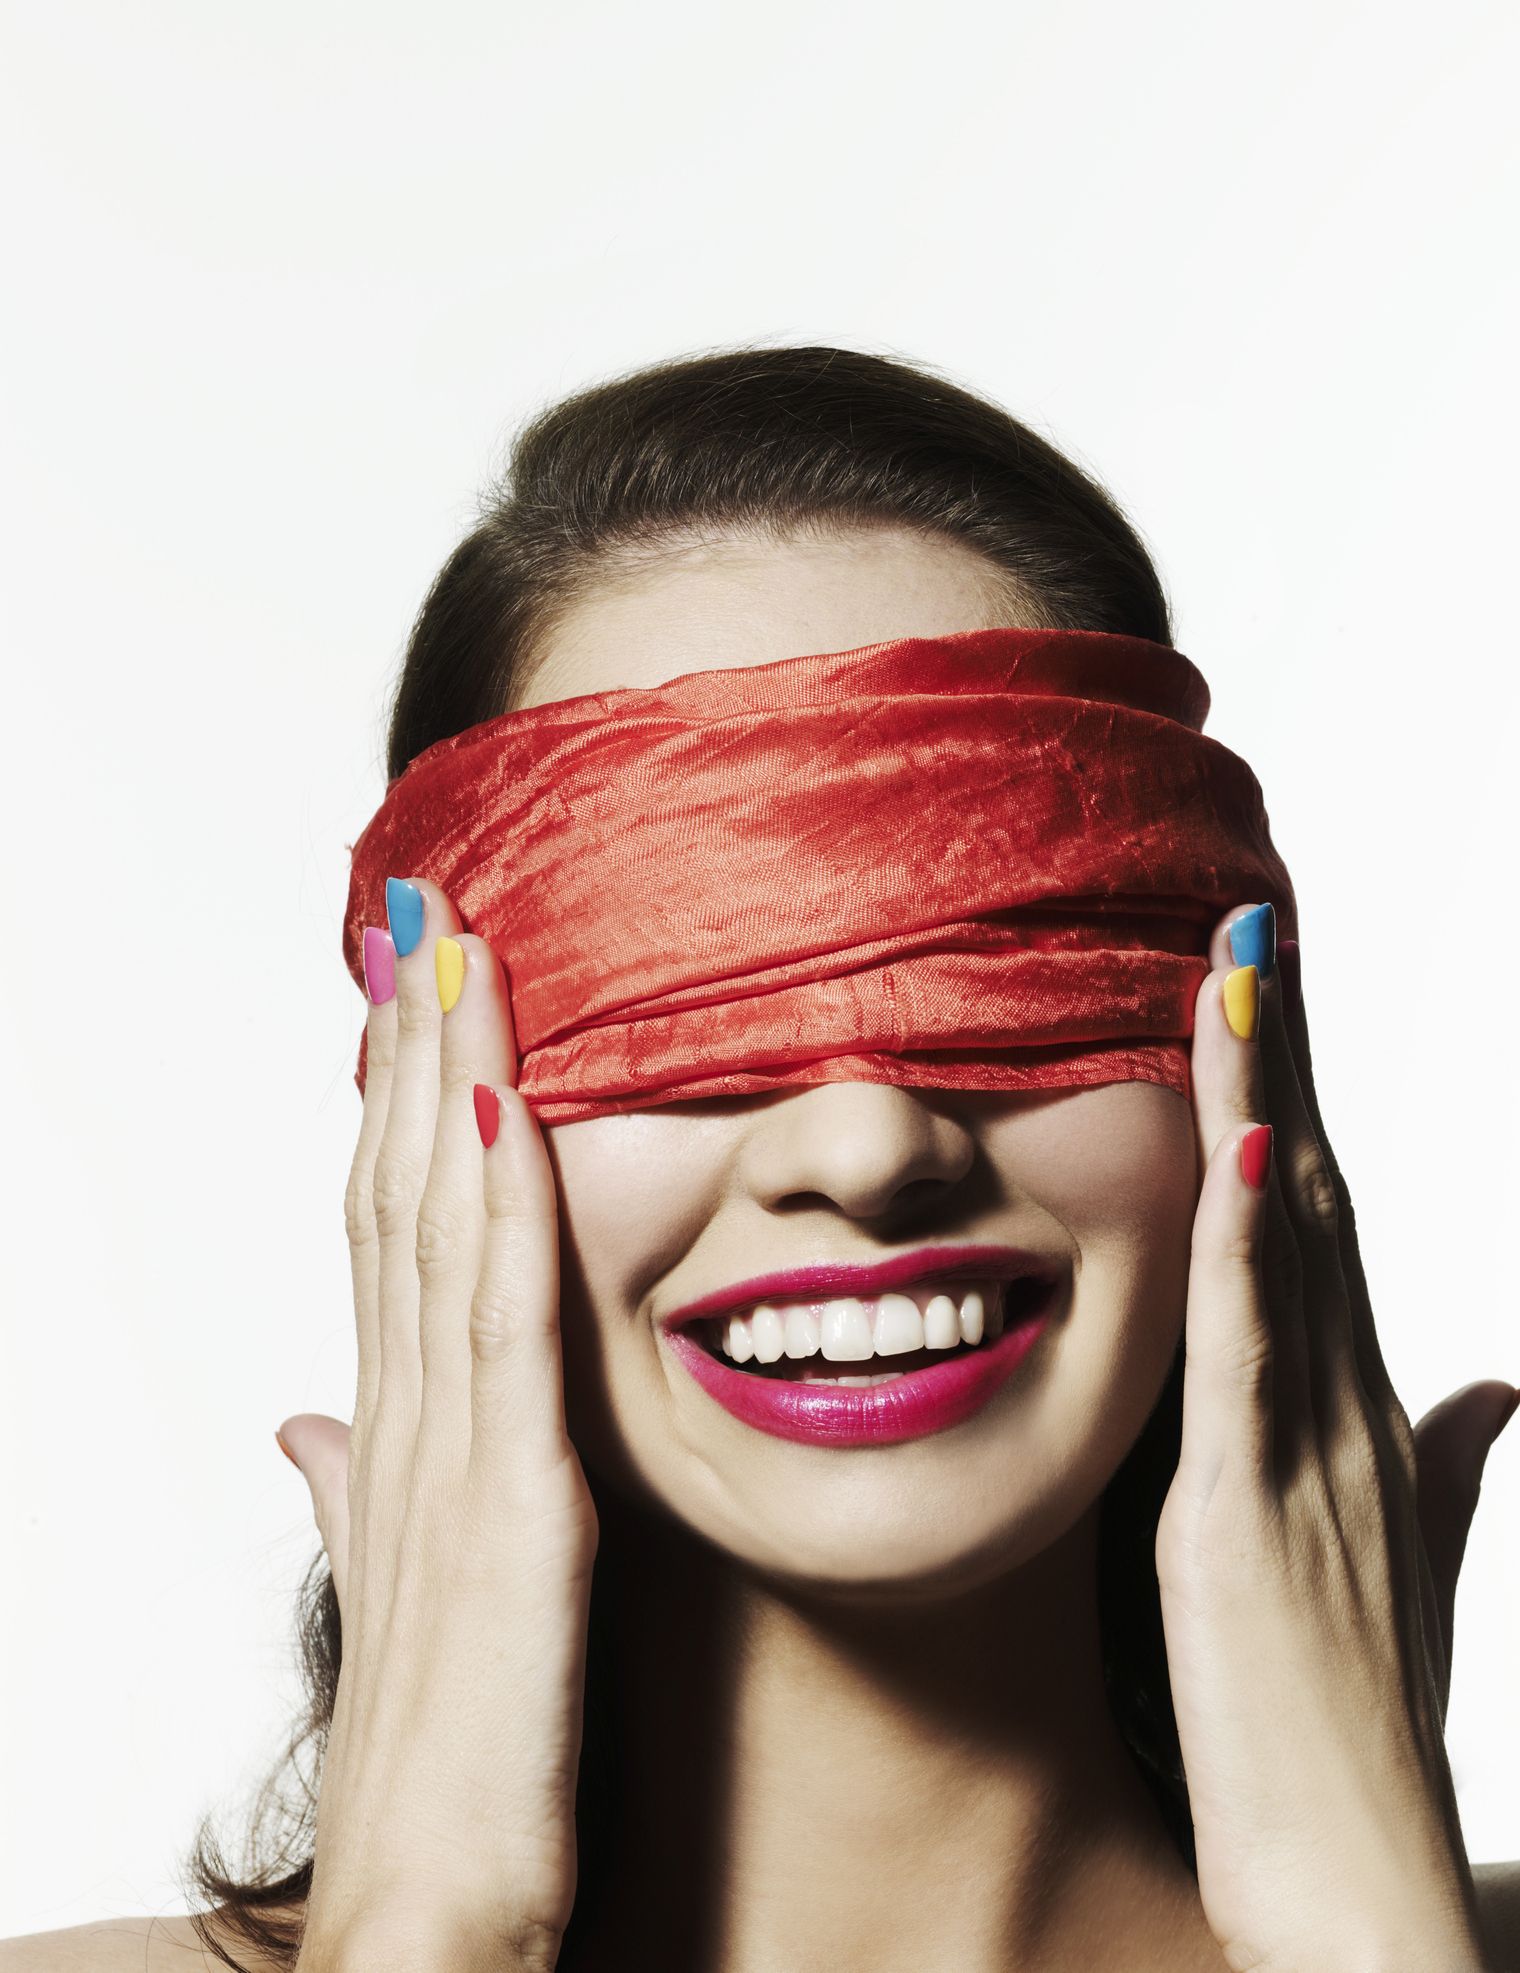 Red Blindfolded Woman Gallery Wrap